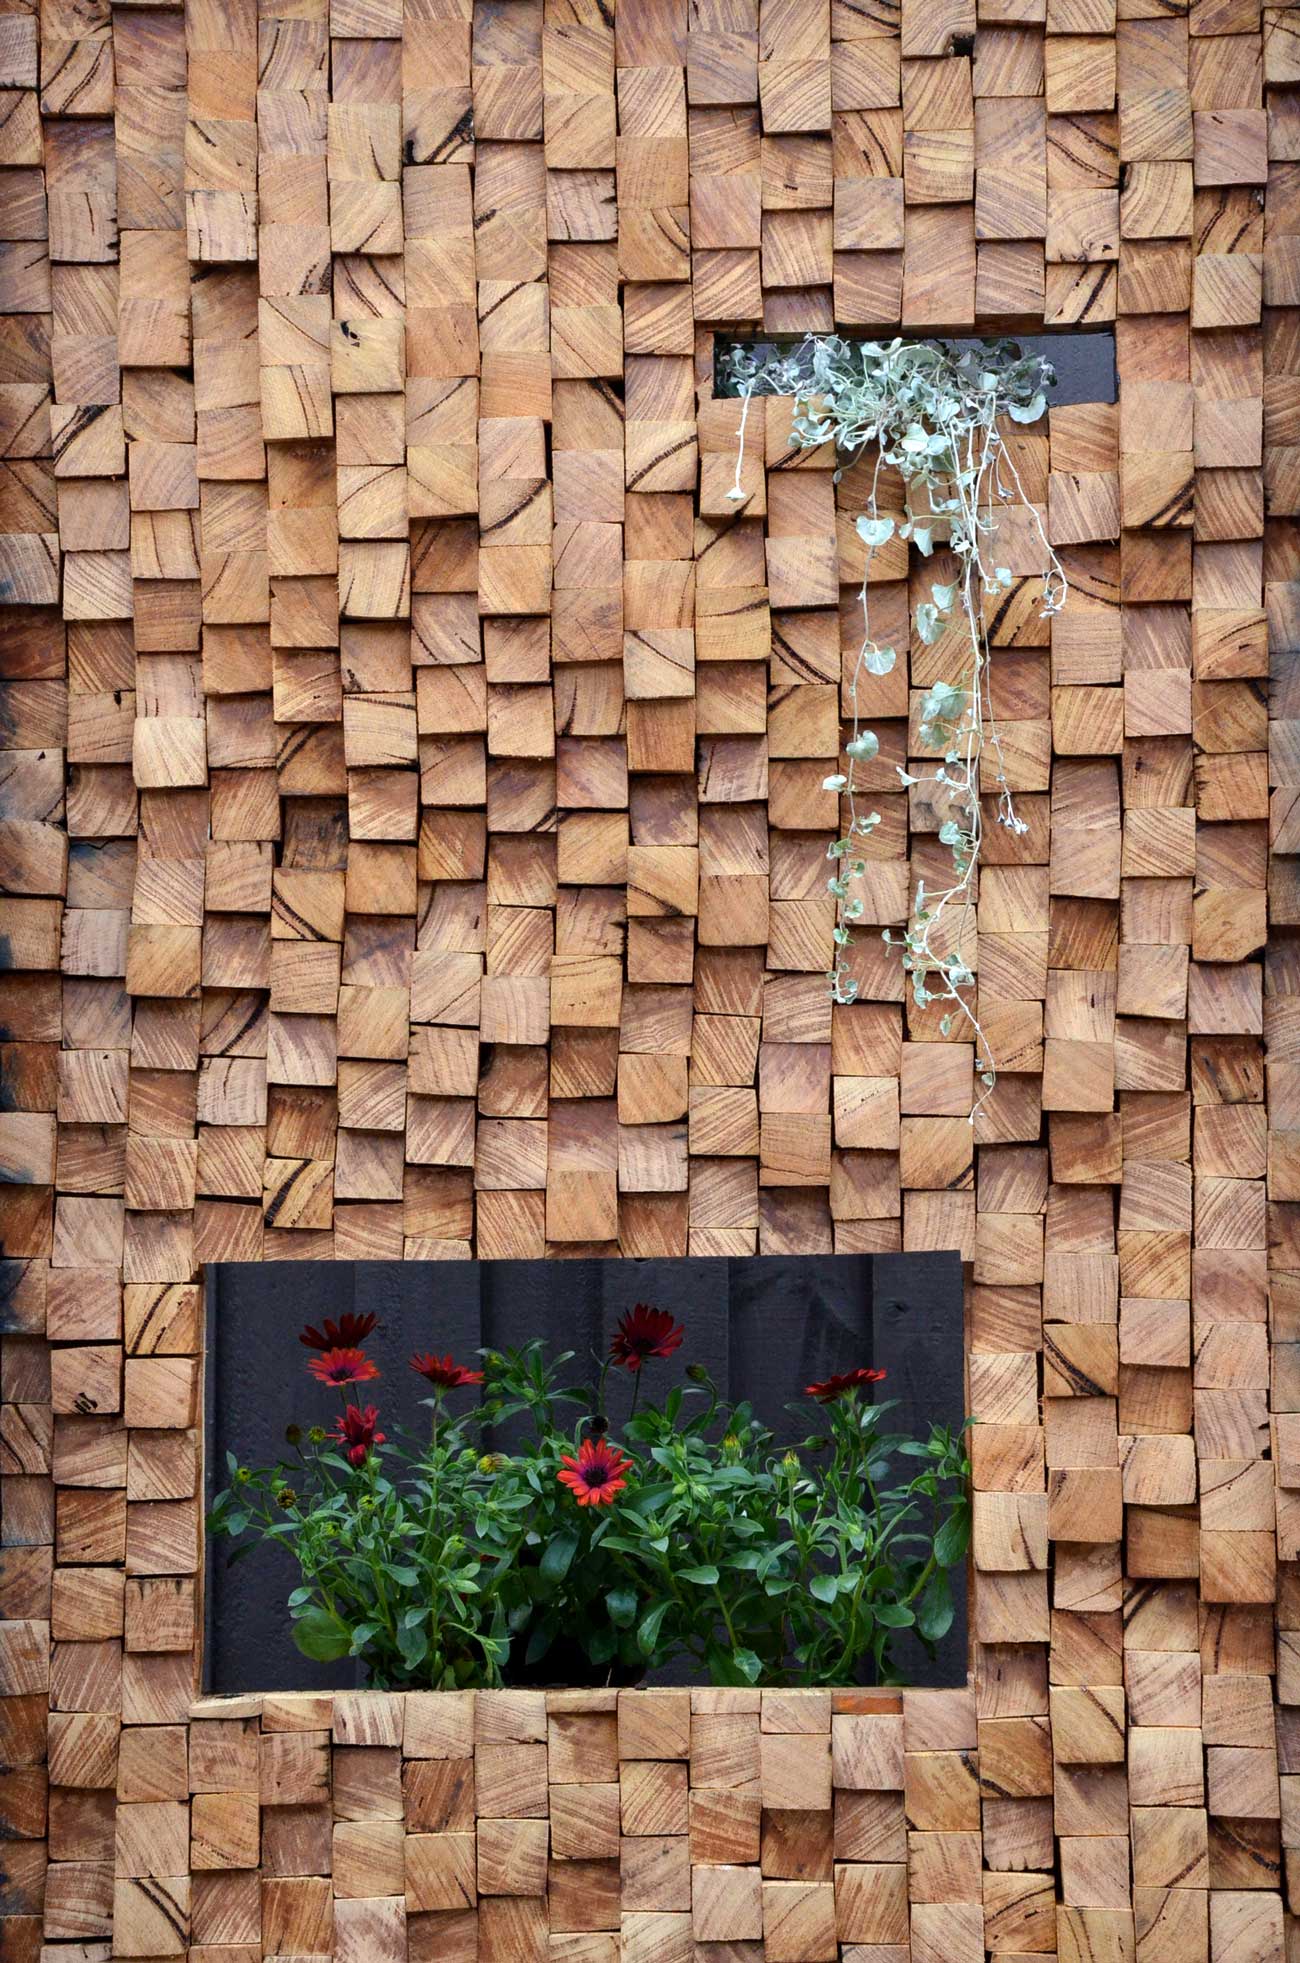 Timber feature wall in the garden